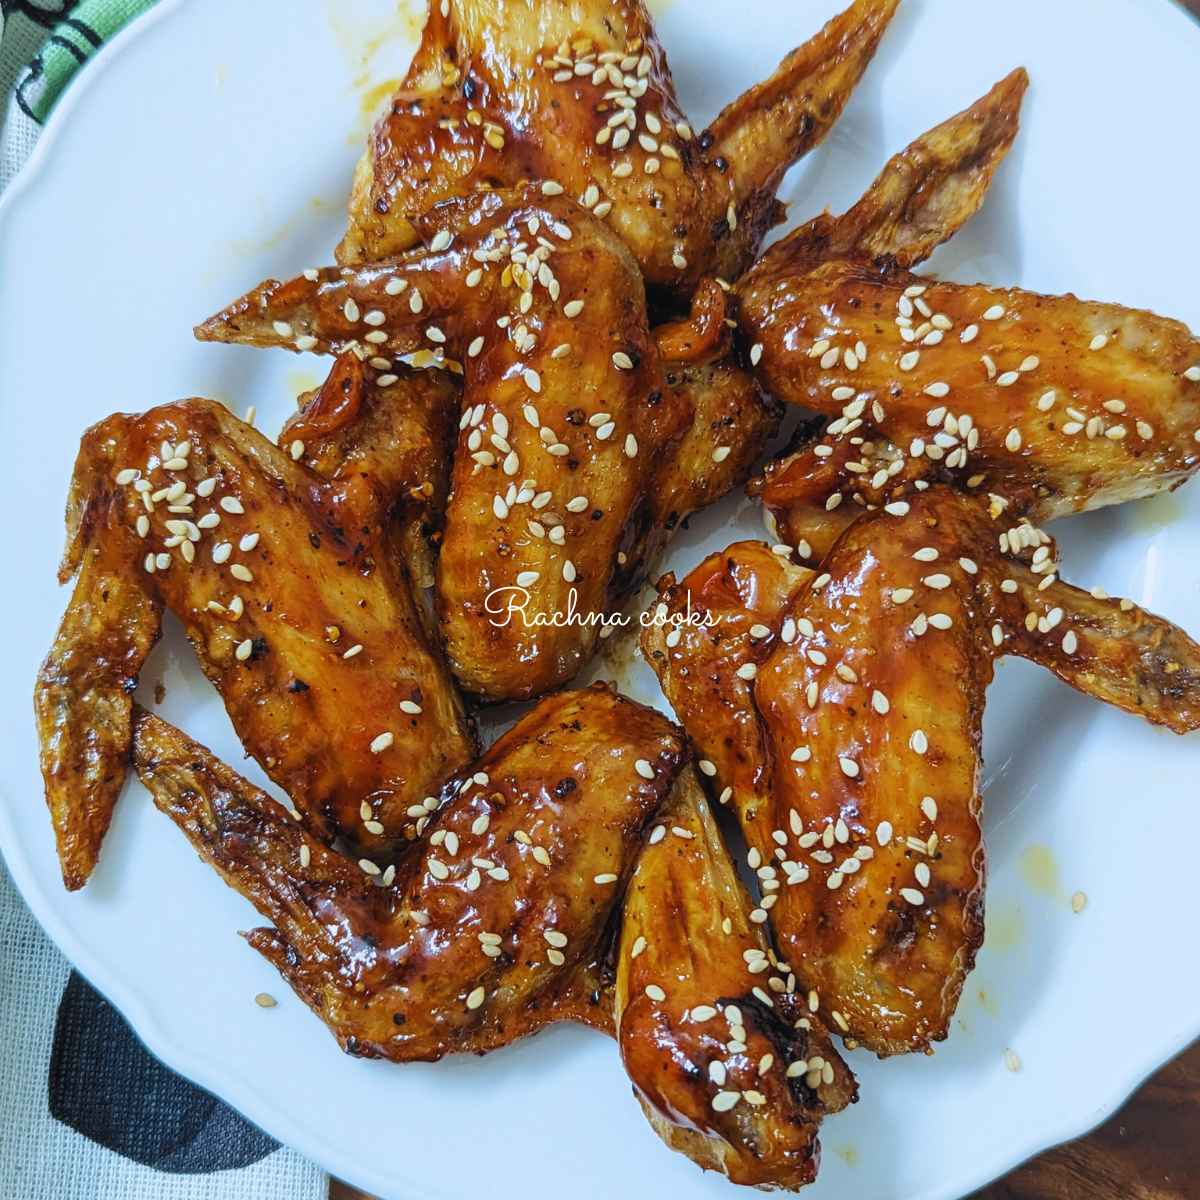 Delicious teriyaki wings after air frying served on a white plate.